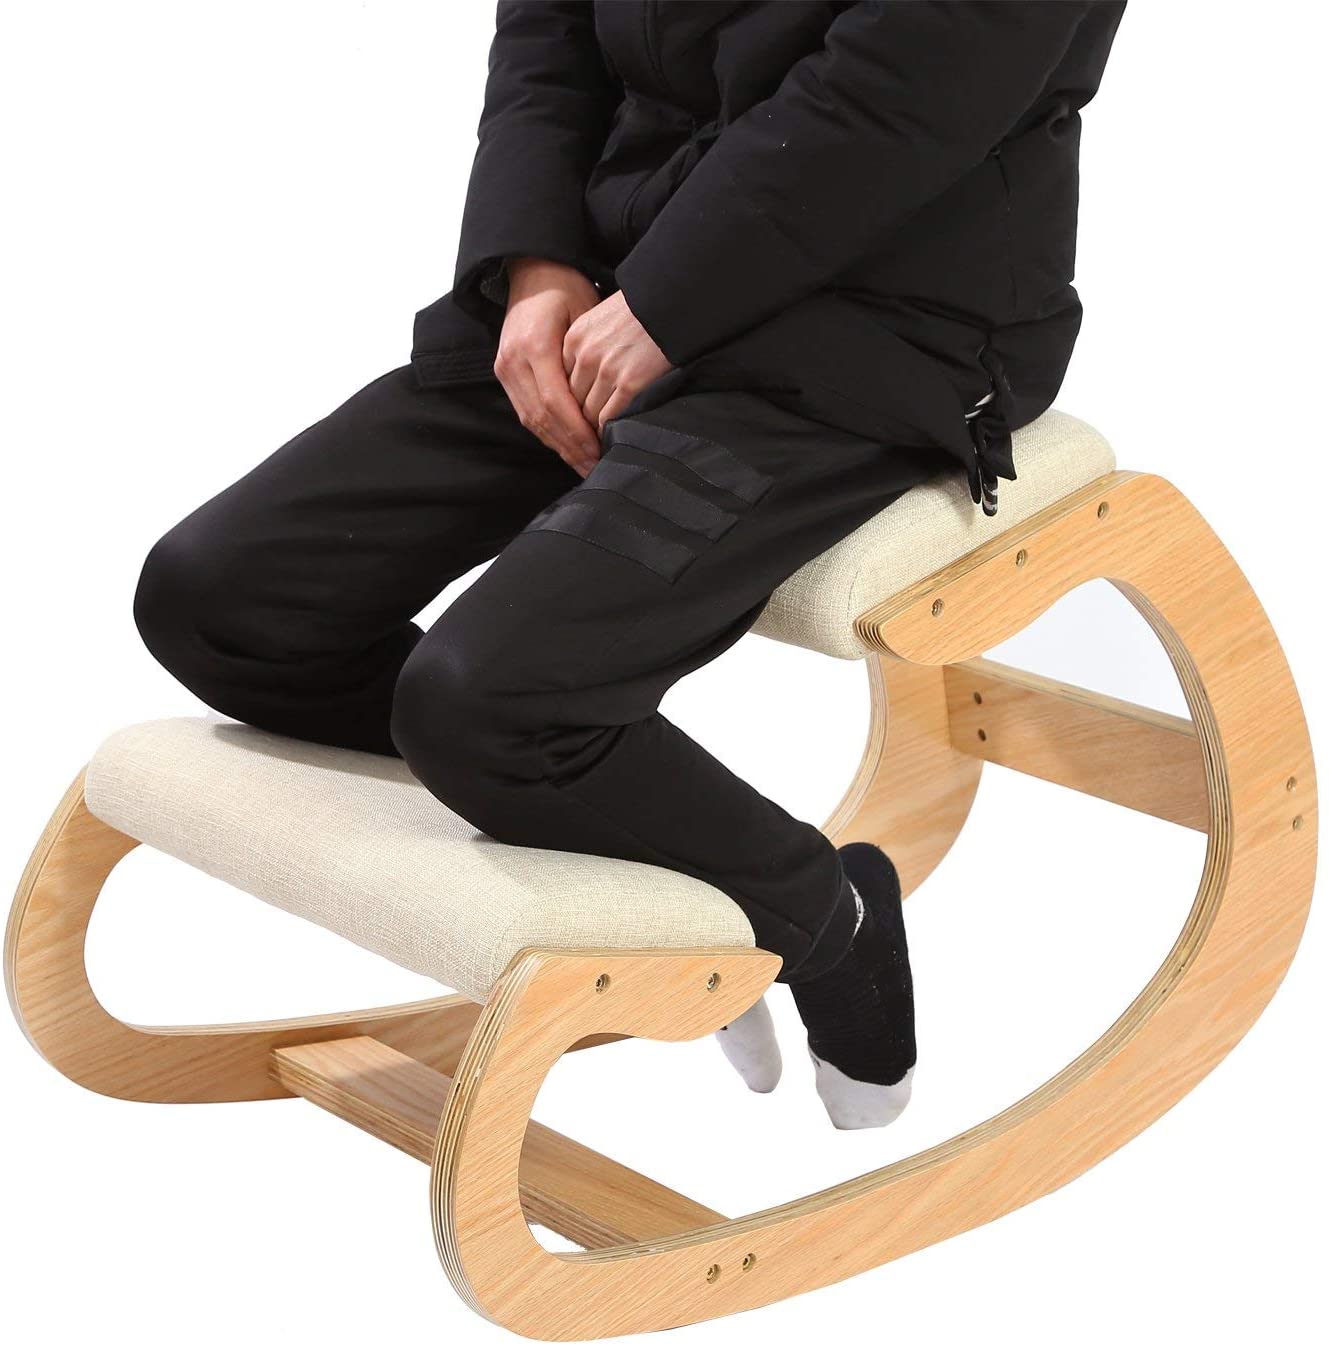 Rocking Kneeling Chair for Upright Posture by Predawn